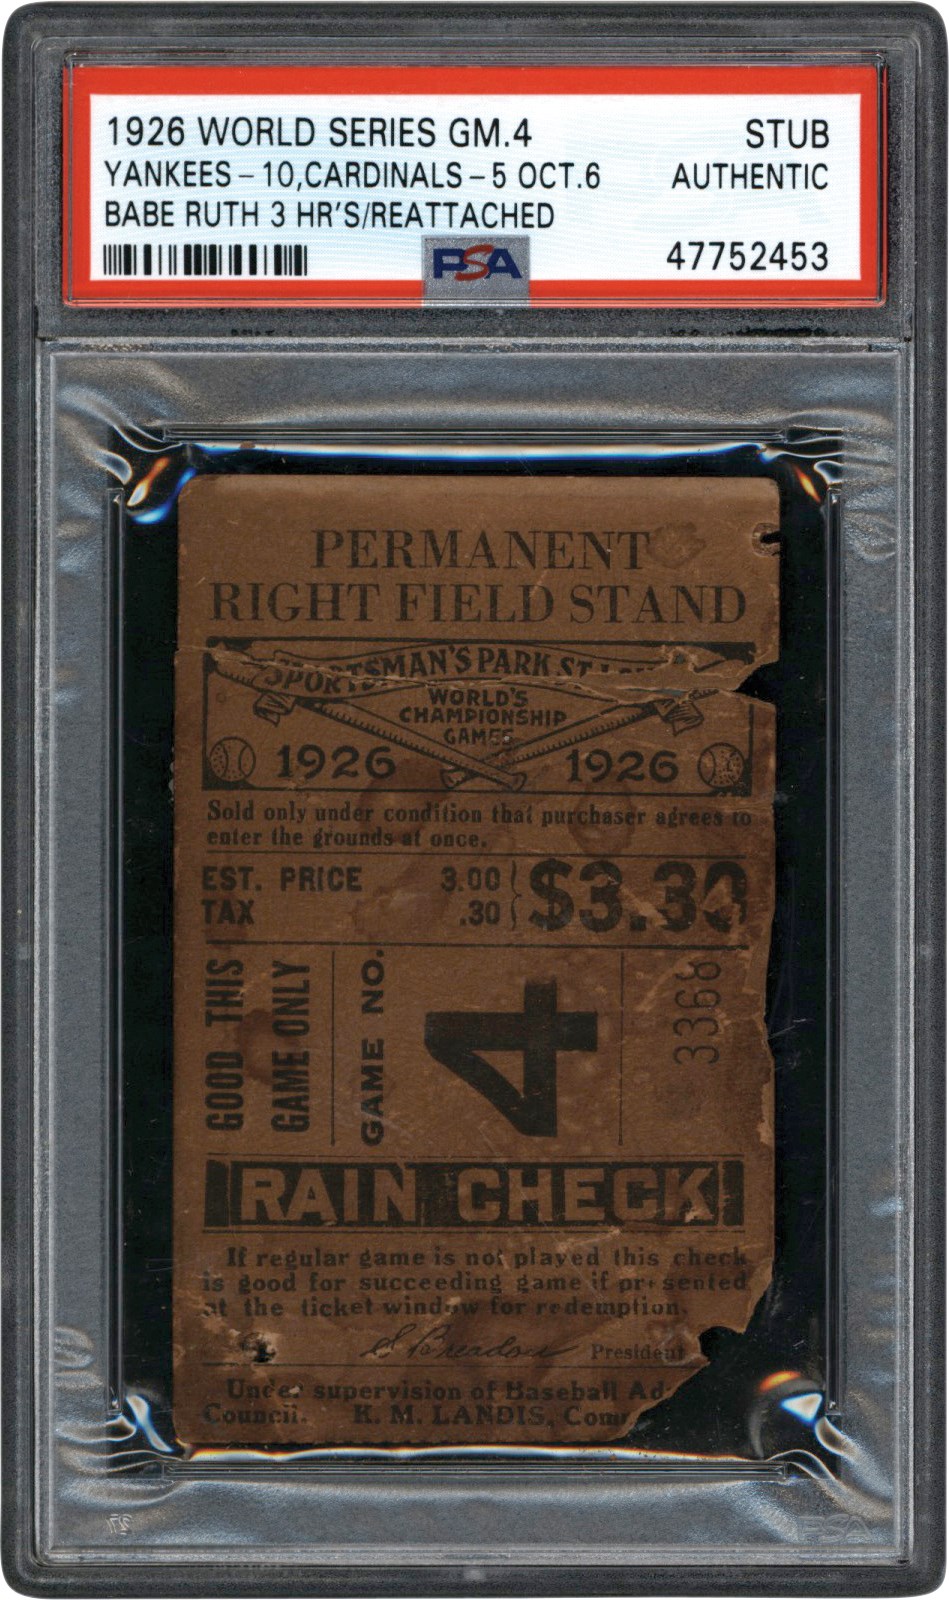 - 1926 World Series Game 4 Ticket Stub - Babe Ruth Hits 3 Home Runs "Johnny Sylvester Game" PSA Authentic